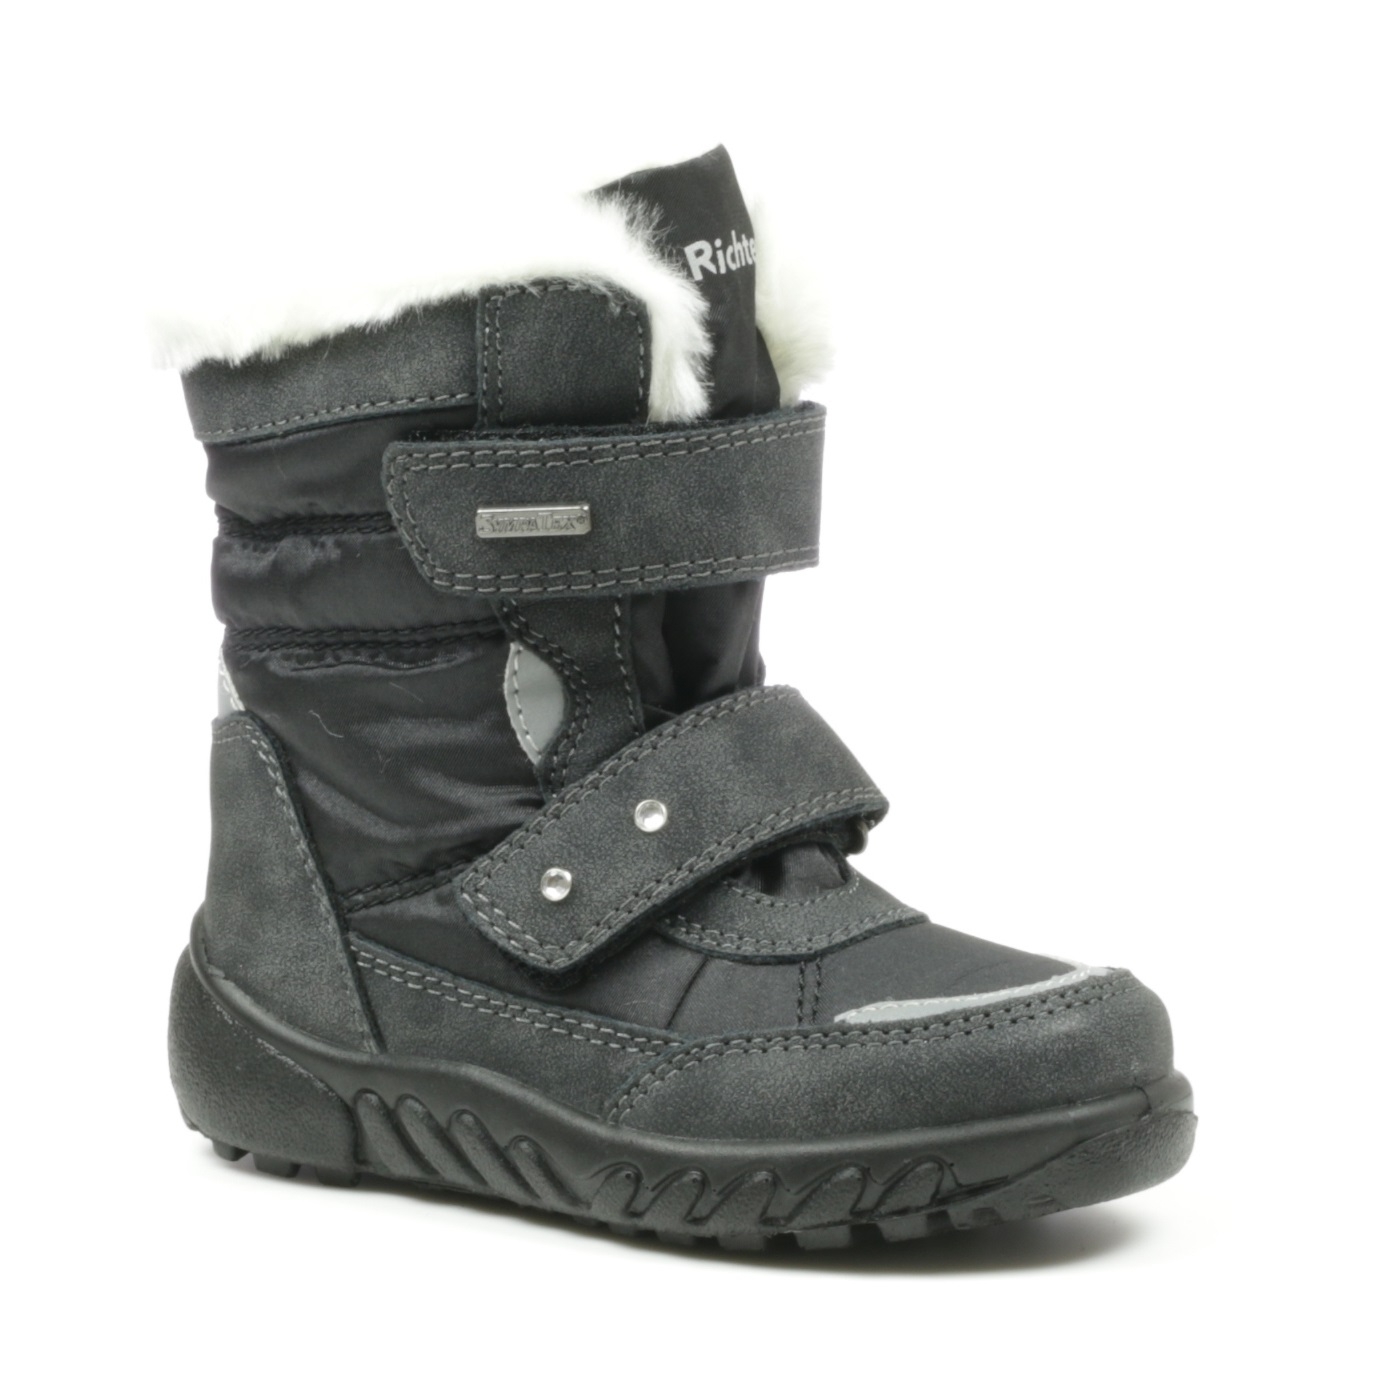 Husky Waterproof Snow Boot - Boys-Boots : Final Clearance on Now ...